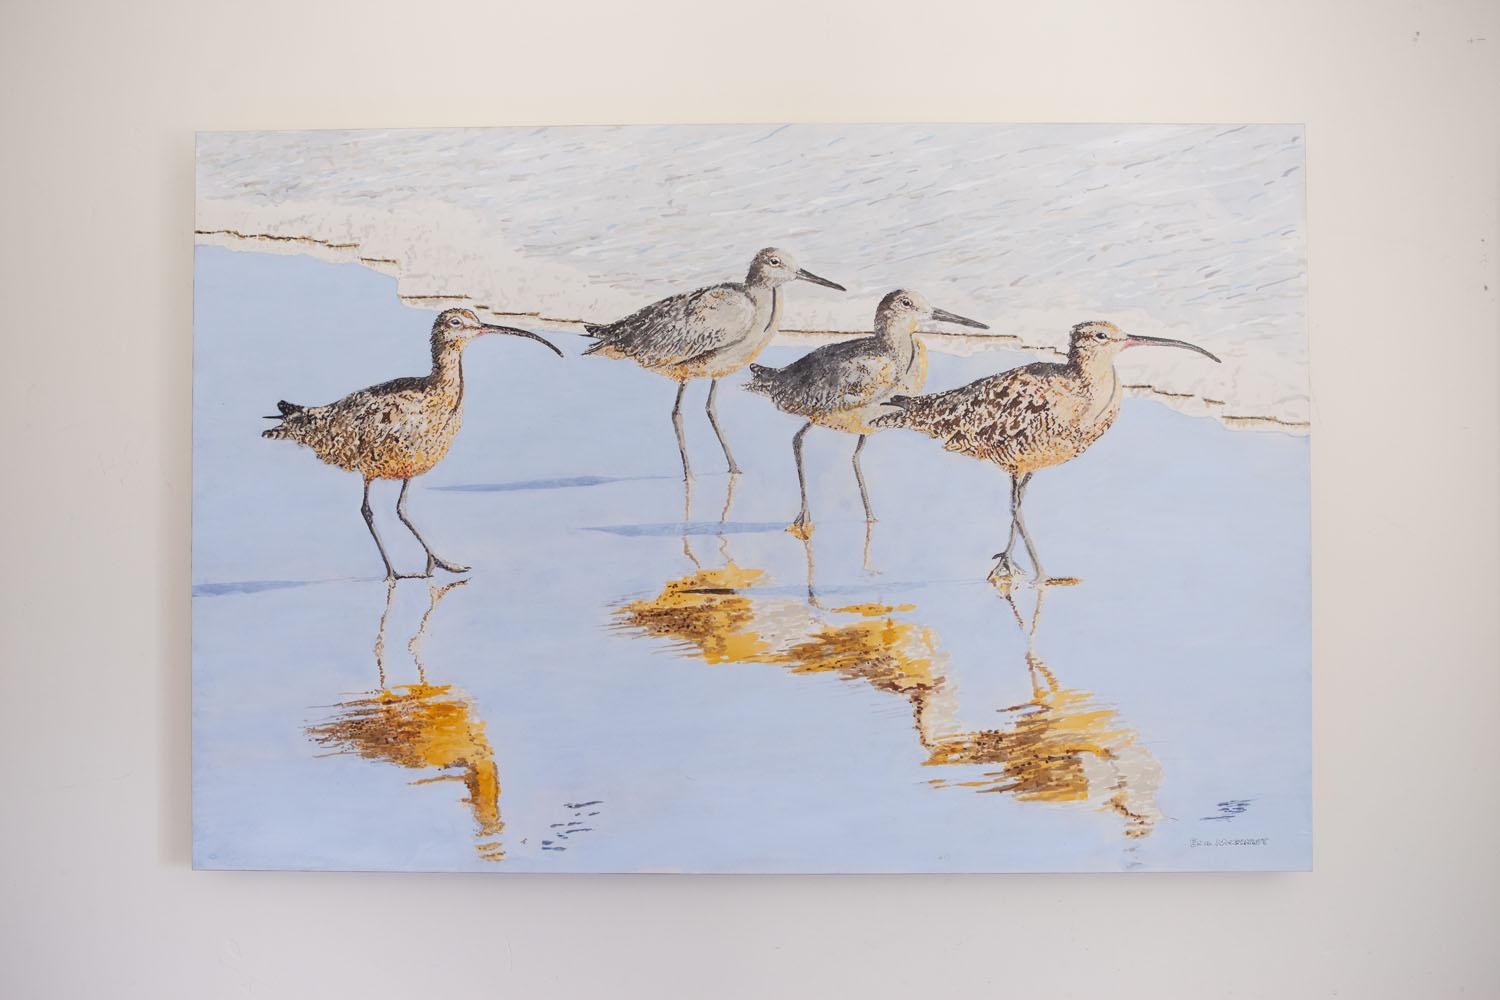 <p>Artist Comments<br />Two whimbrels and two willets hanging out together on a Santa Barbara beach on a warm winter afternoon. To me, this painting is the beach as it should be; inviting for bare feet in the gentle surf, and far from worldly cares.